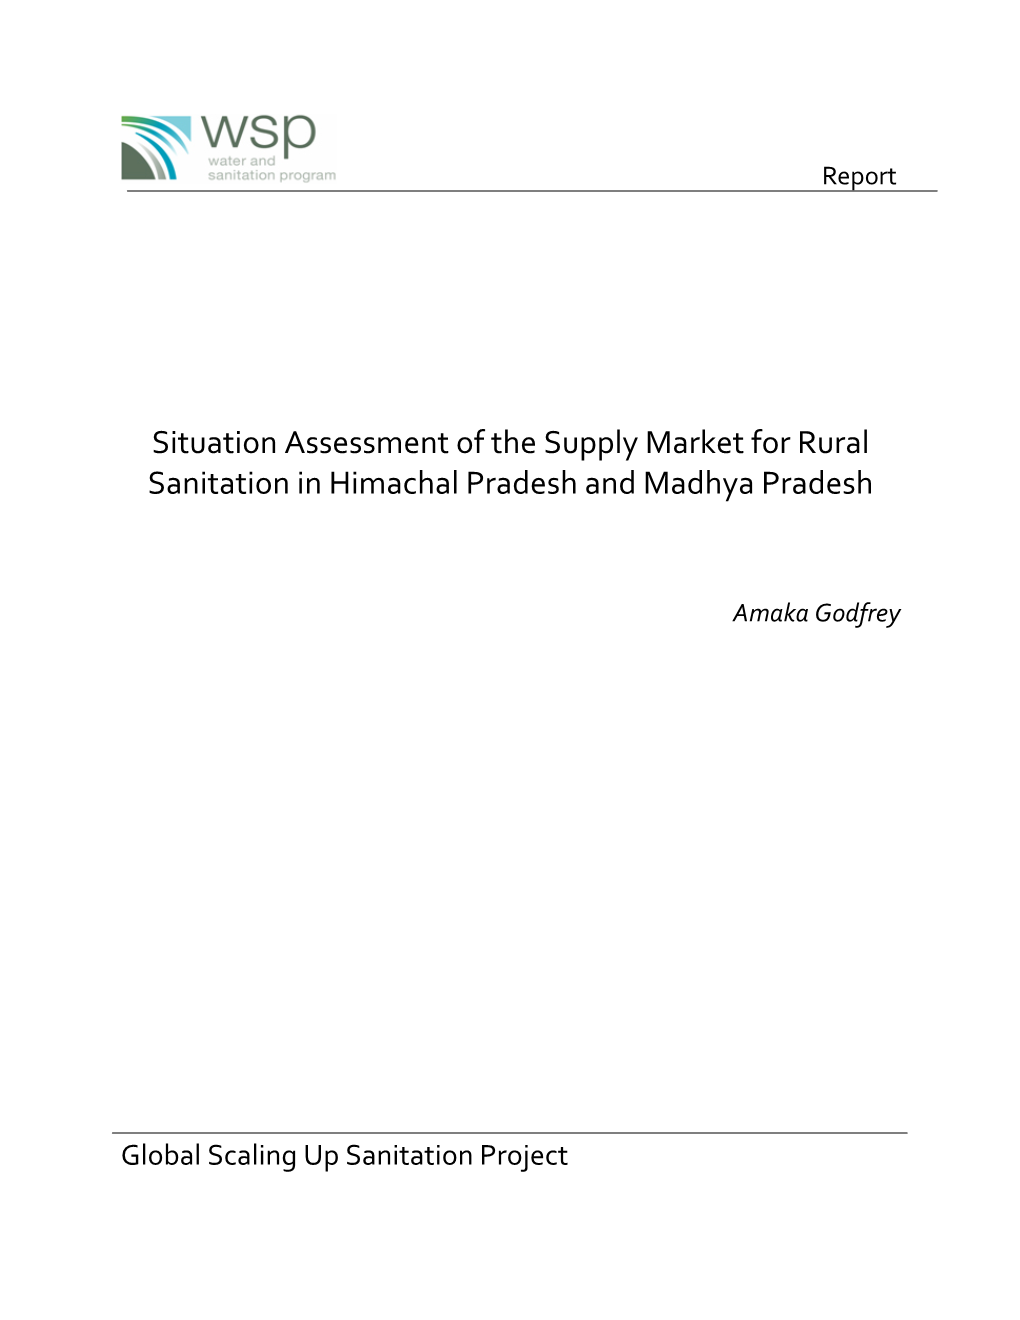 Situation Assessment of the Supply Market for Rural Sanitation in Himachal Pradesh and Madhya Pradesh